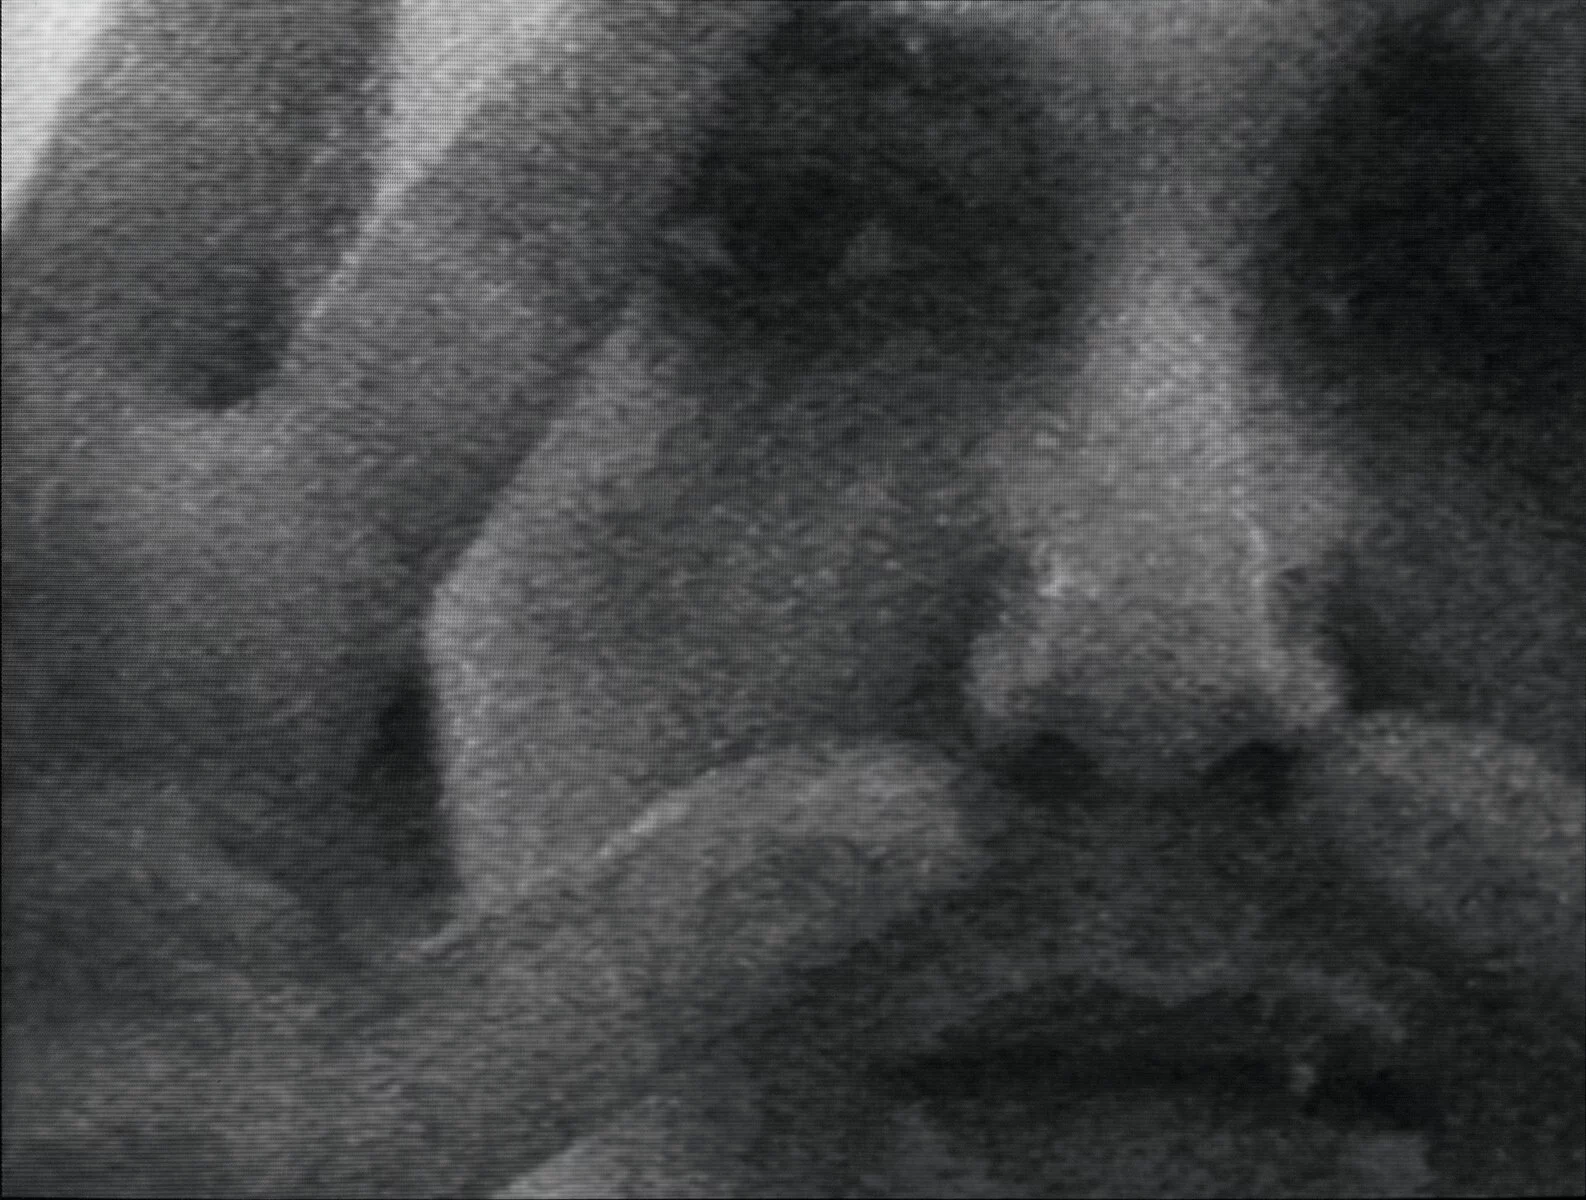 Still image from black and white video featuring a close up of a person's face. Their hands are pressed up against a clear barrier.